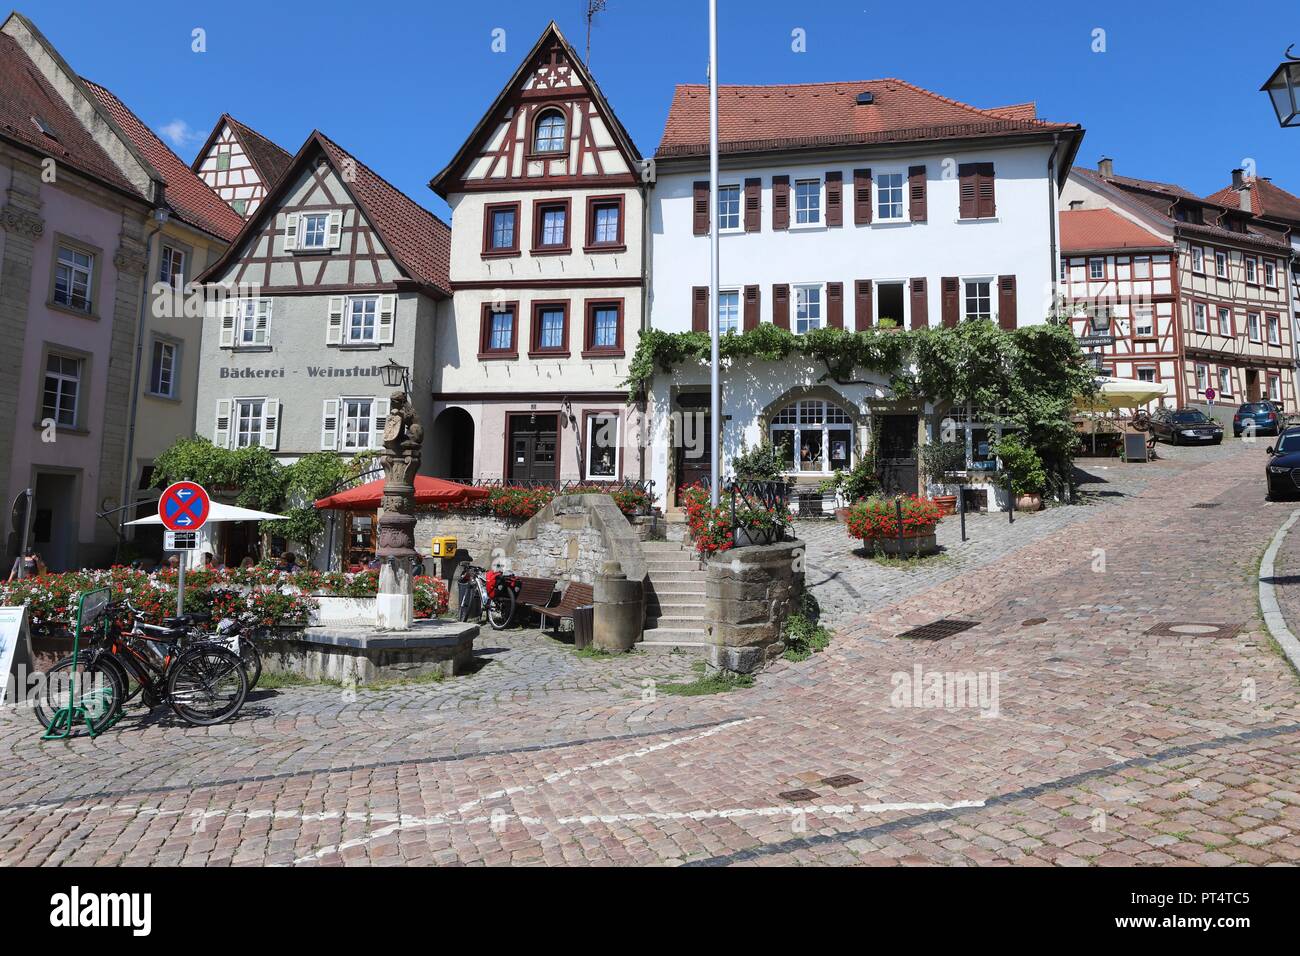 Medieval town square Stock Photo